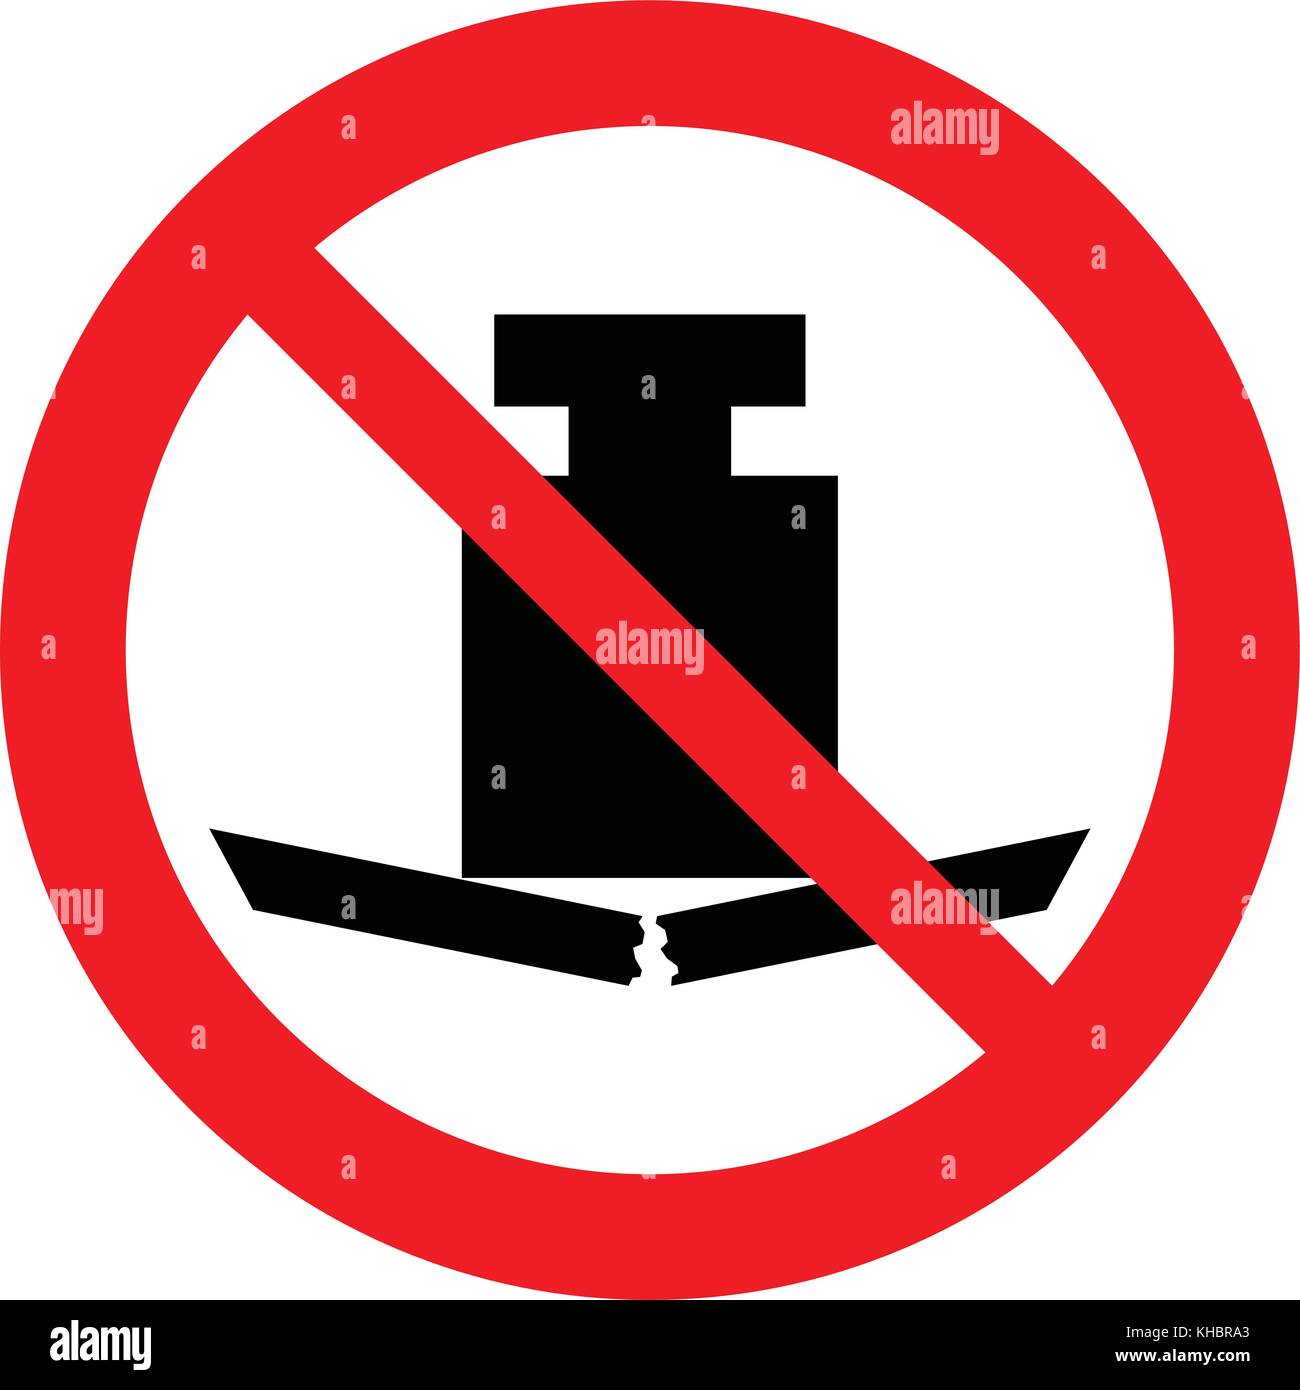 No heavy load, do not place heavy objects on surface, prohibition sign, vector illustration. Stock Vector